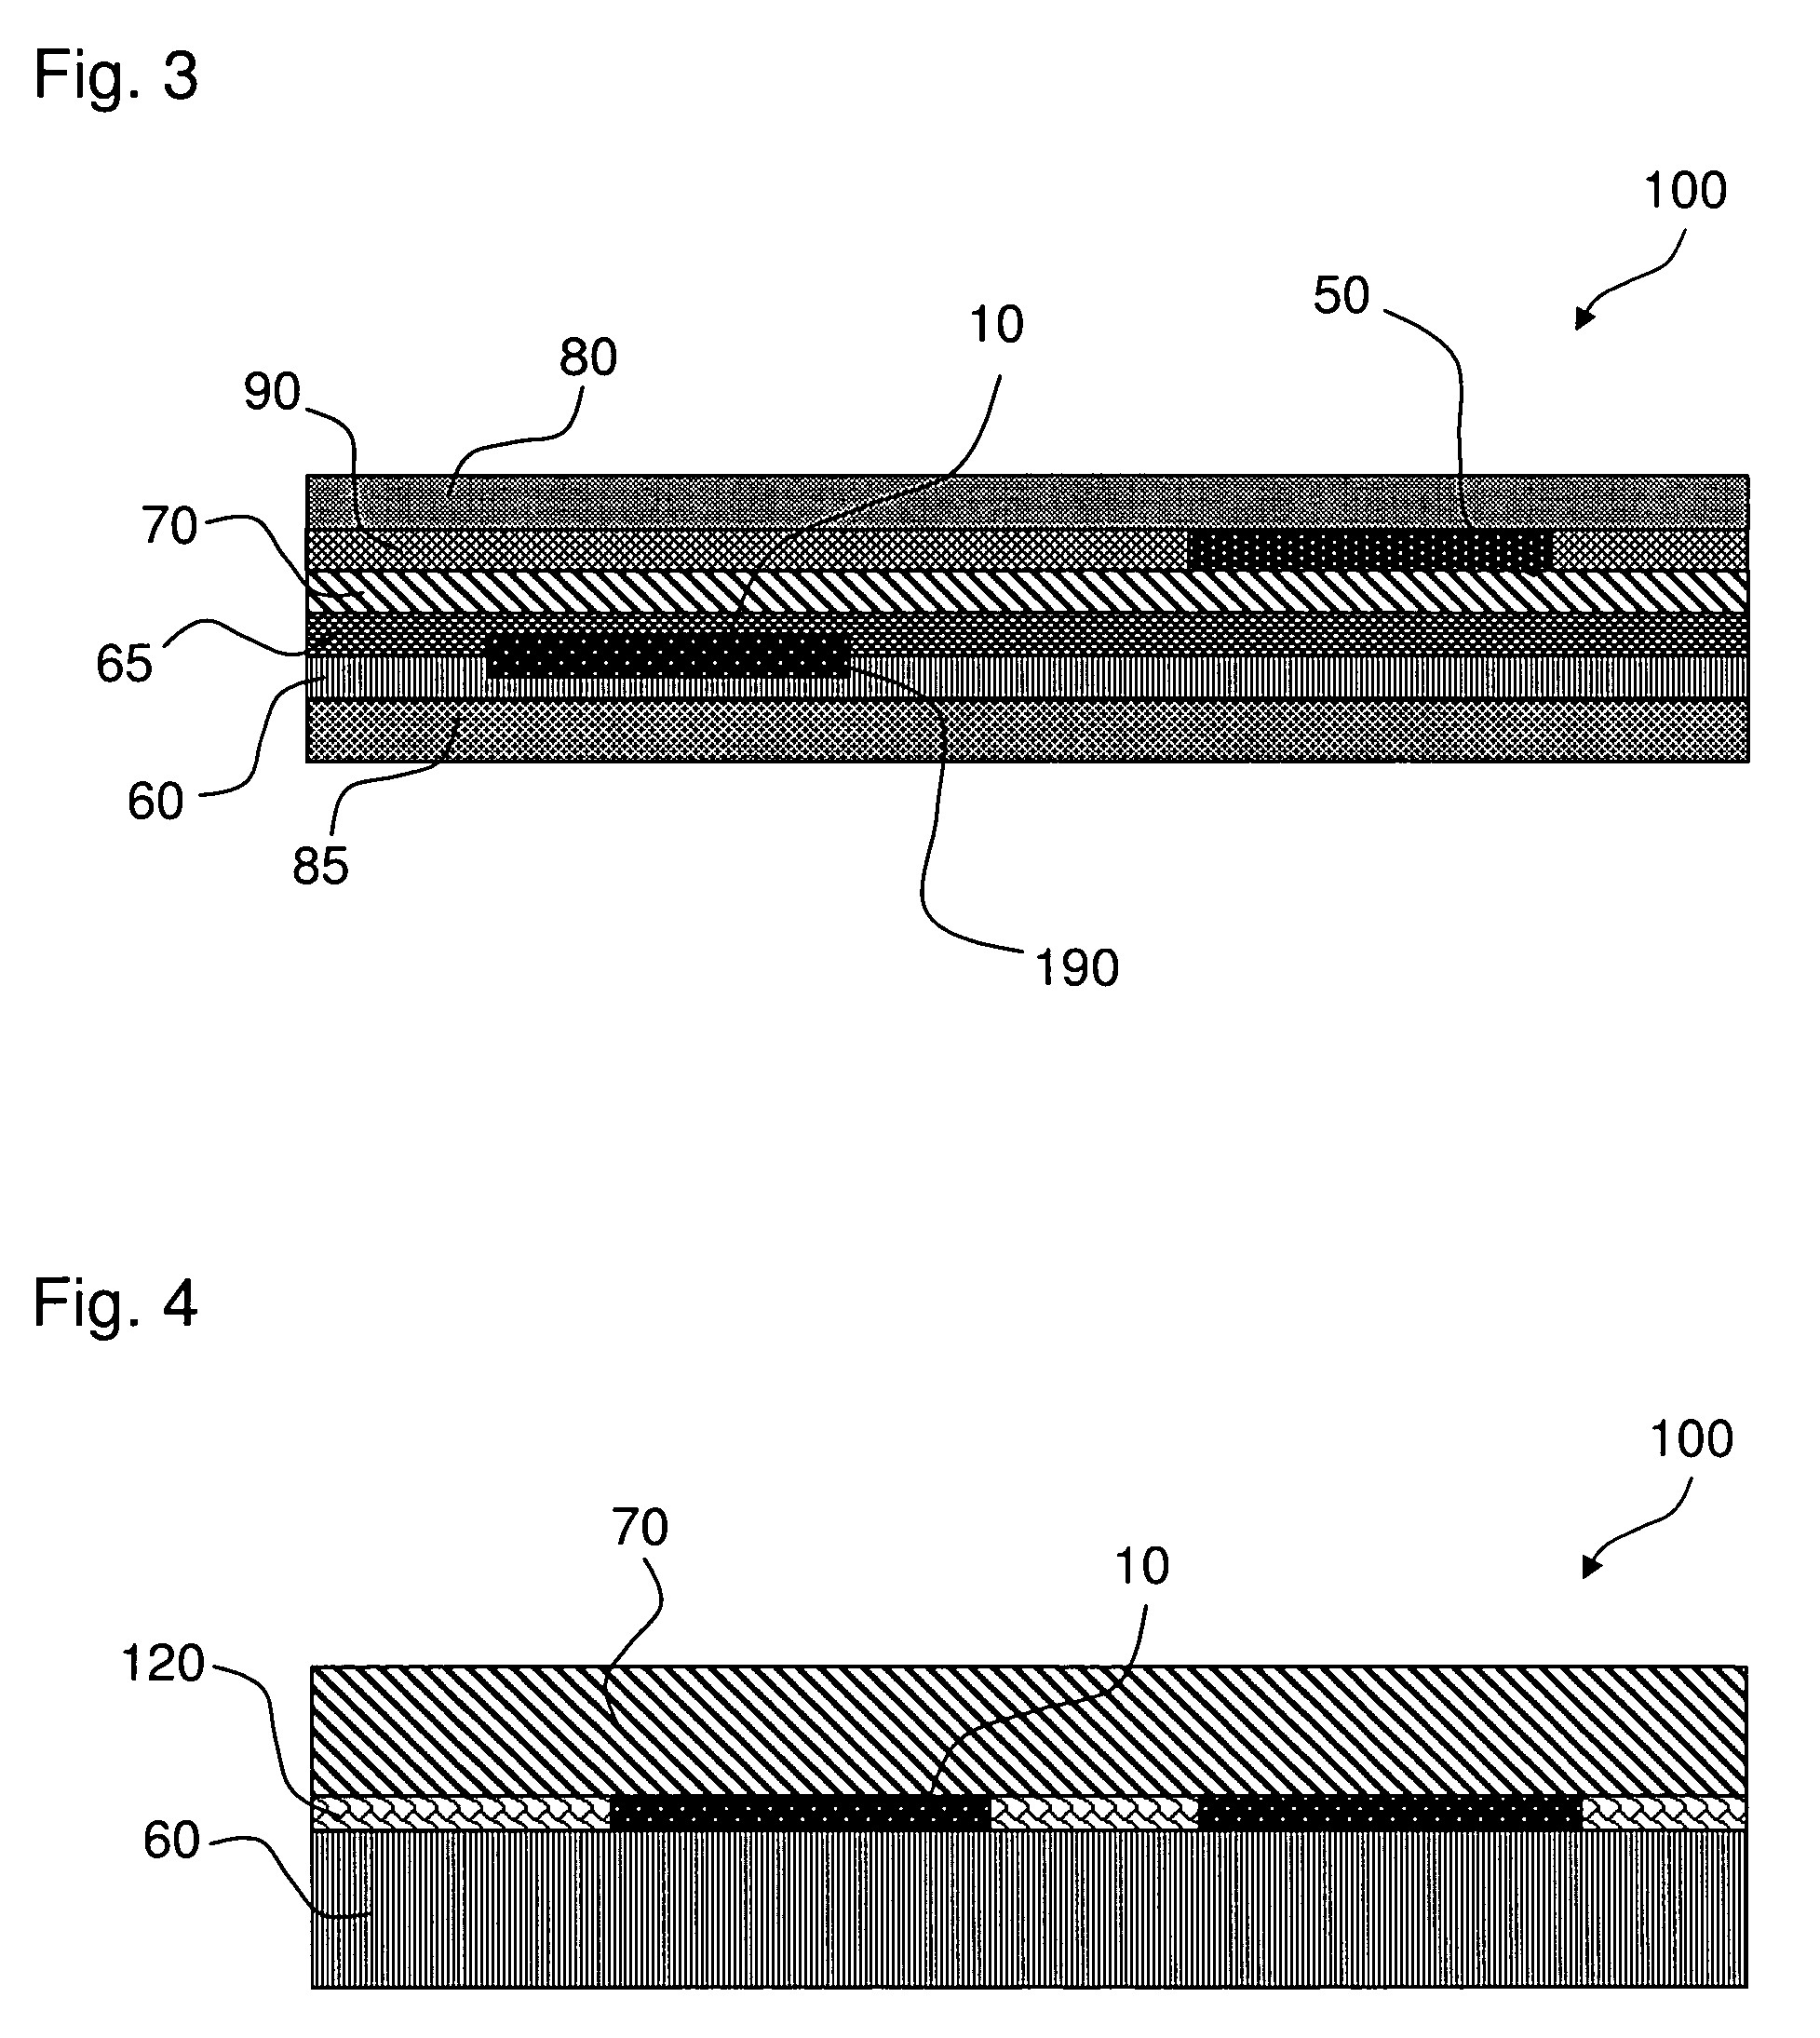 Formwork panel with frame containing an electronic identification element